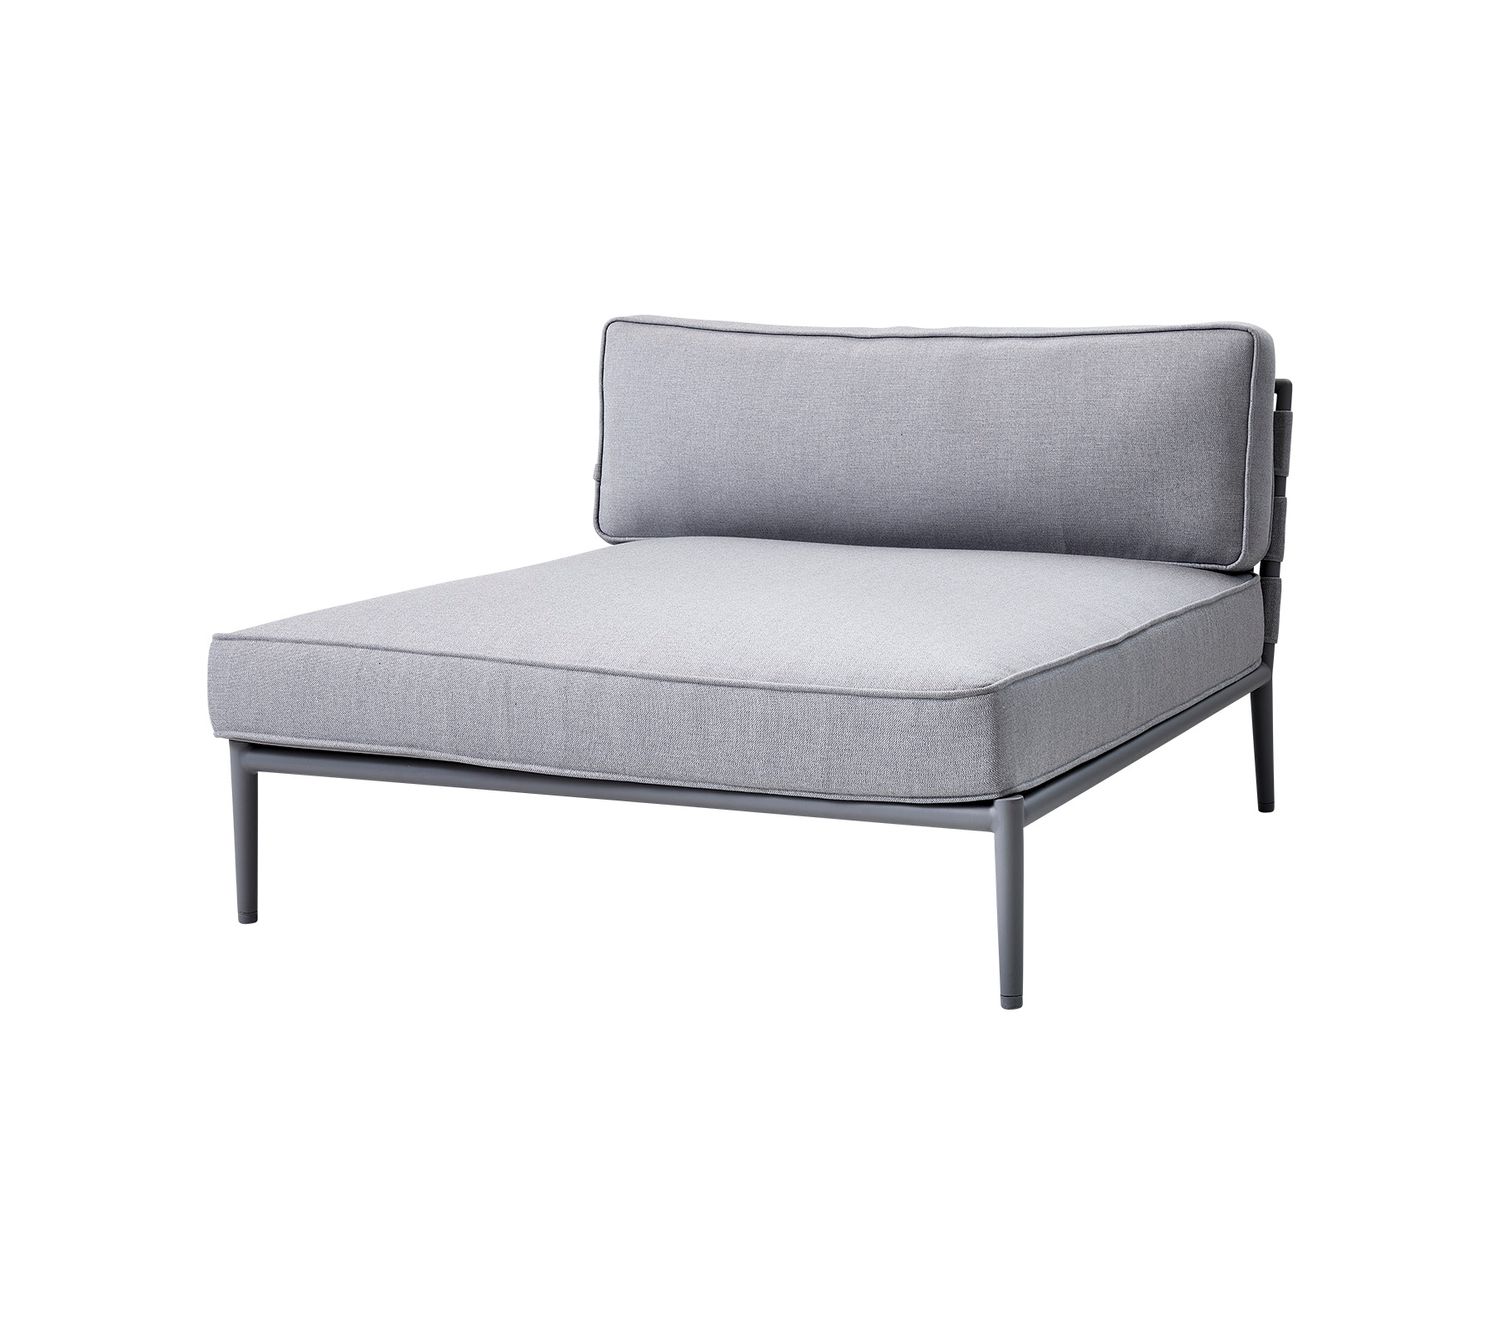 Cane-line Conic | Daybed Modul AirTouch | Dark Grey